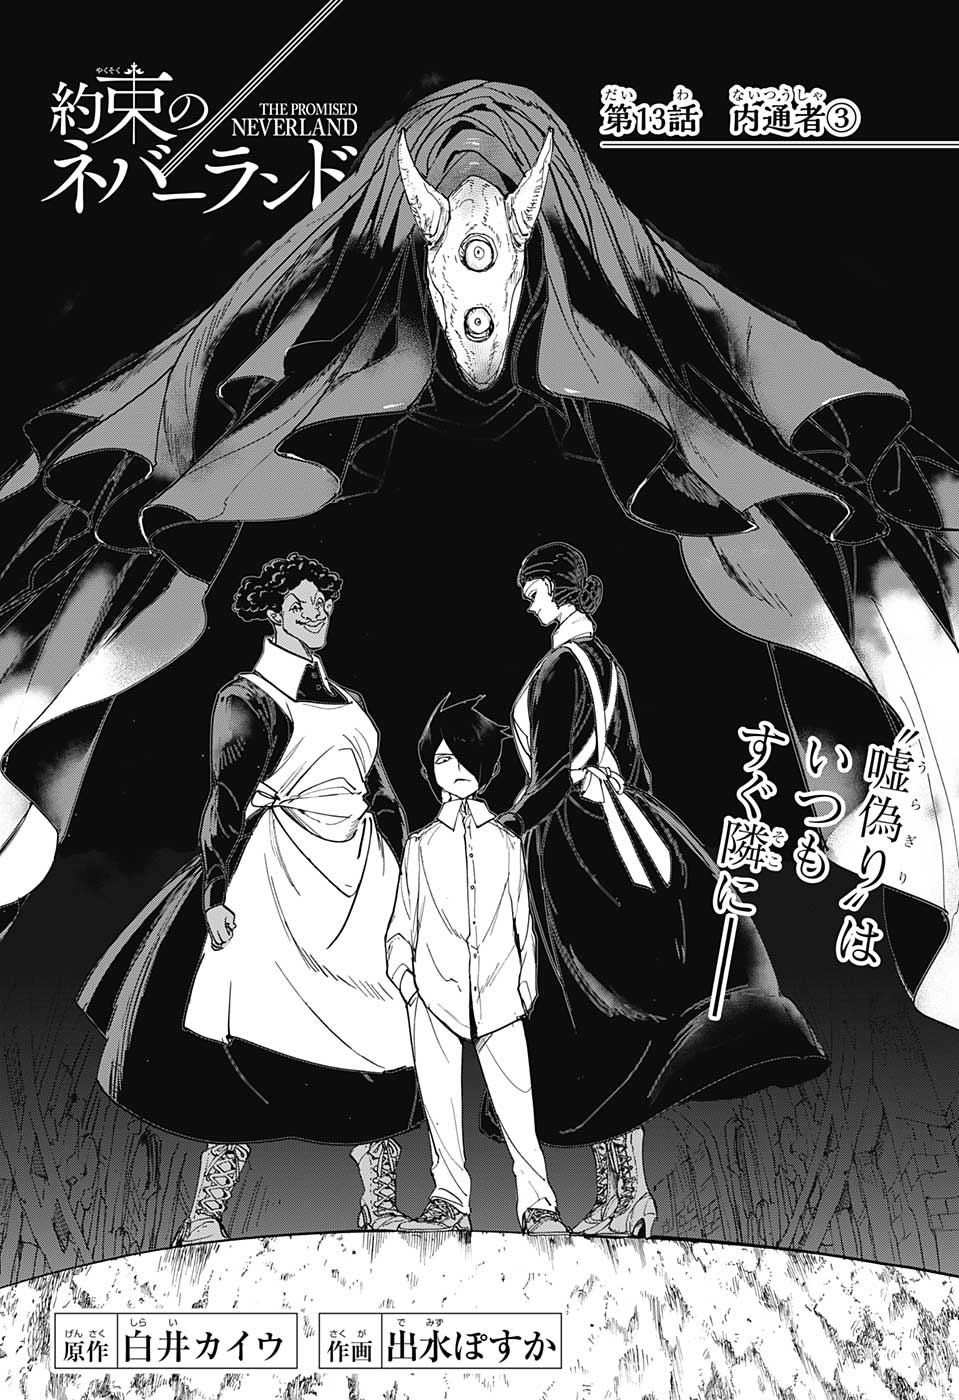 Chapter 13 The Promised Neverland Wiki Fandom Powered By